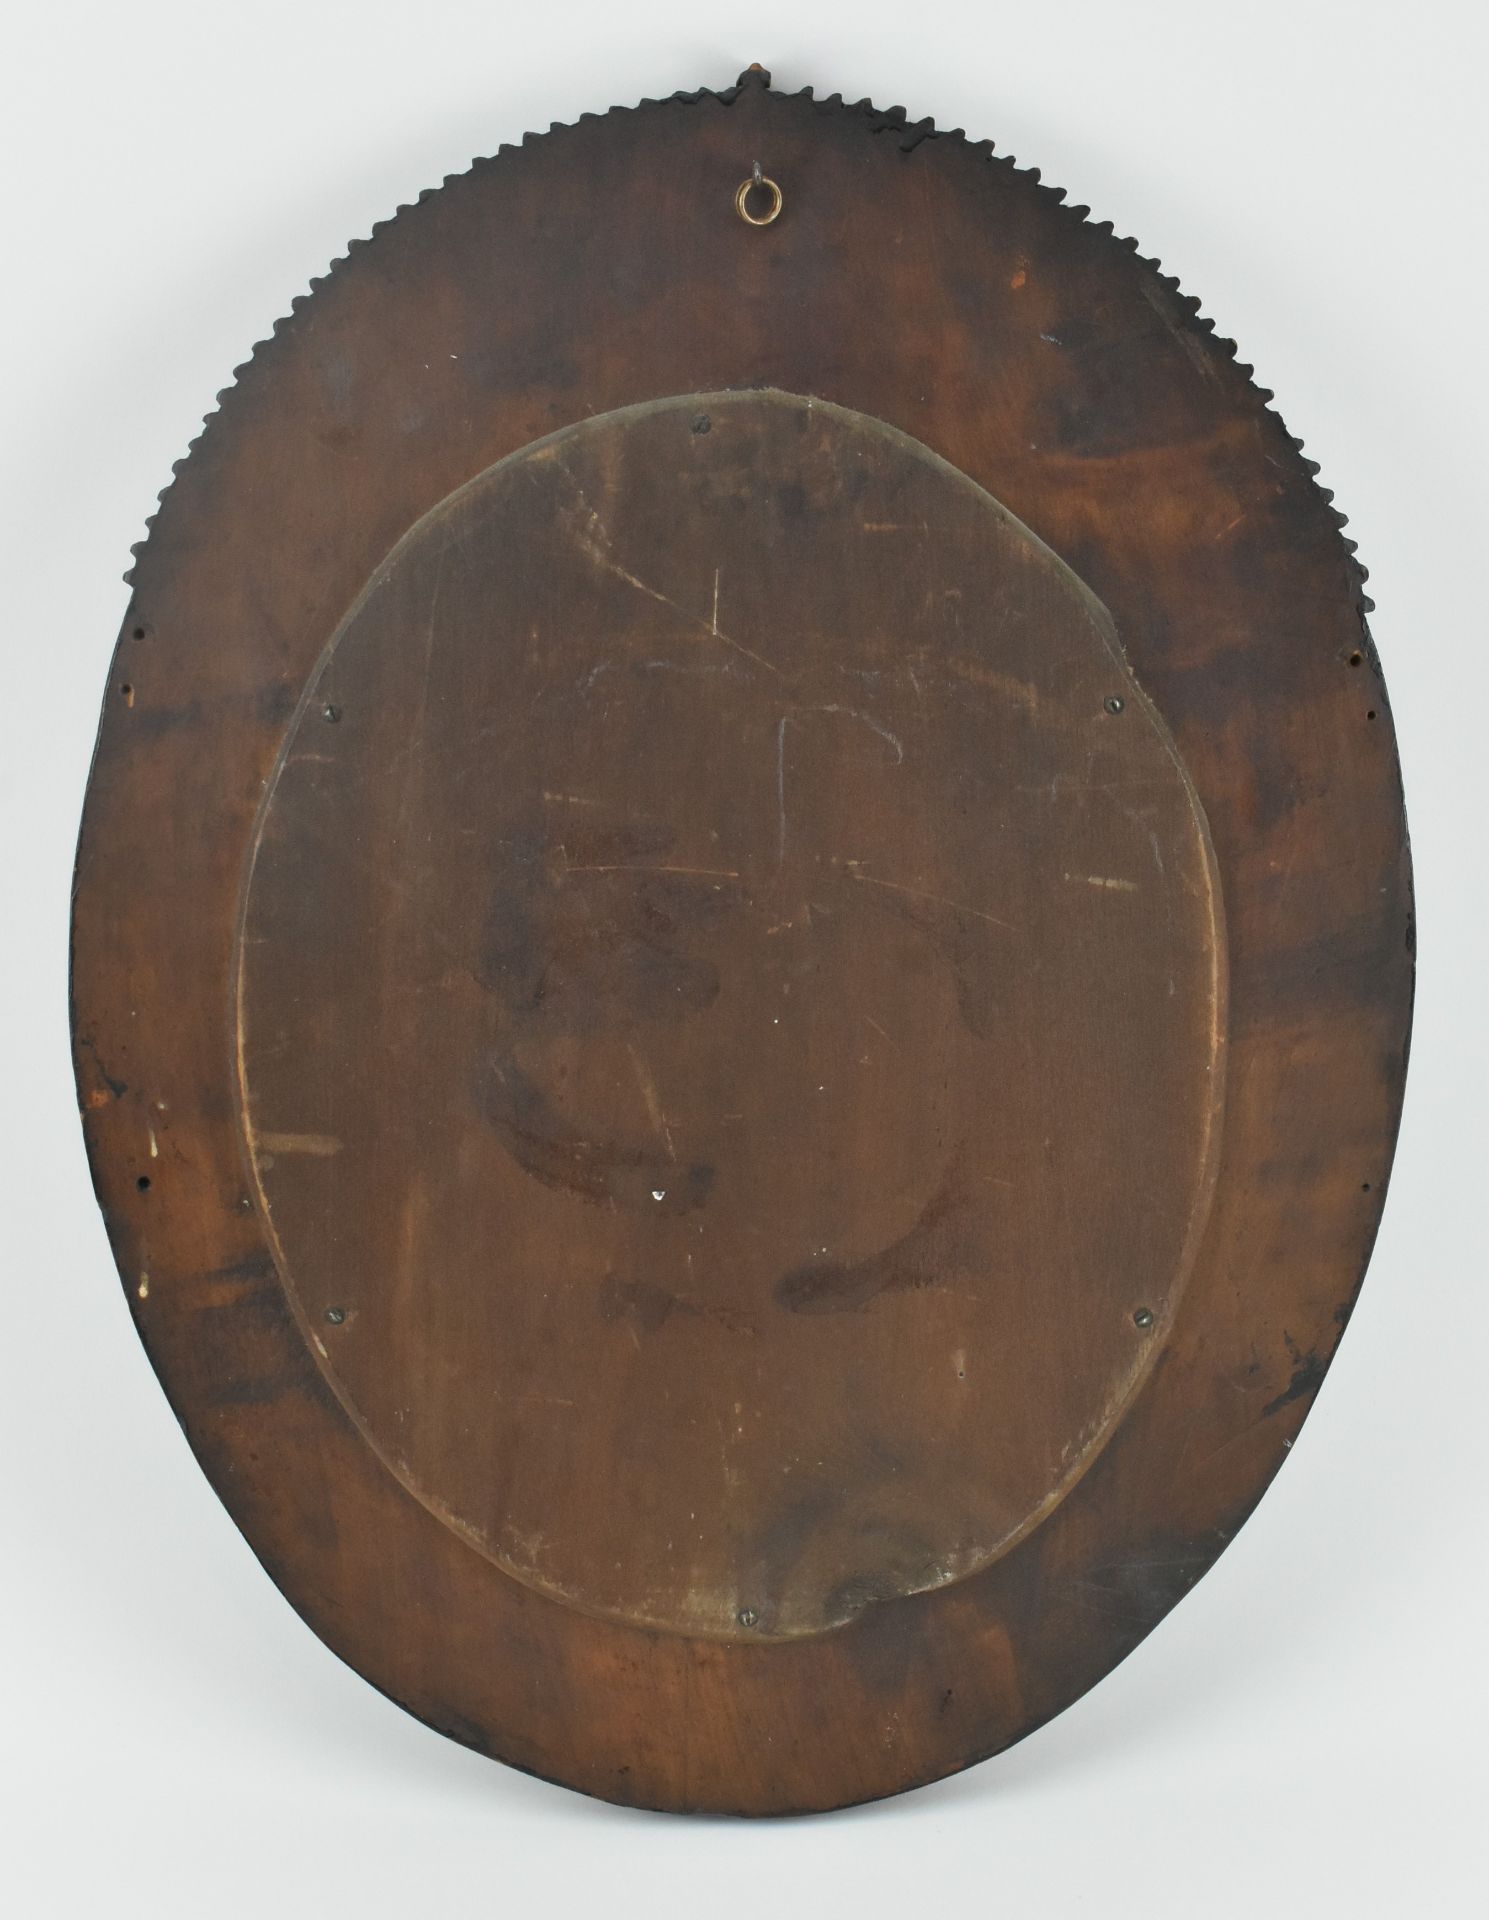 CHINESE WOODEN CARVED WALL MIRROR 民国 木框镜子 - Image 6 of 6